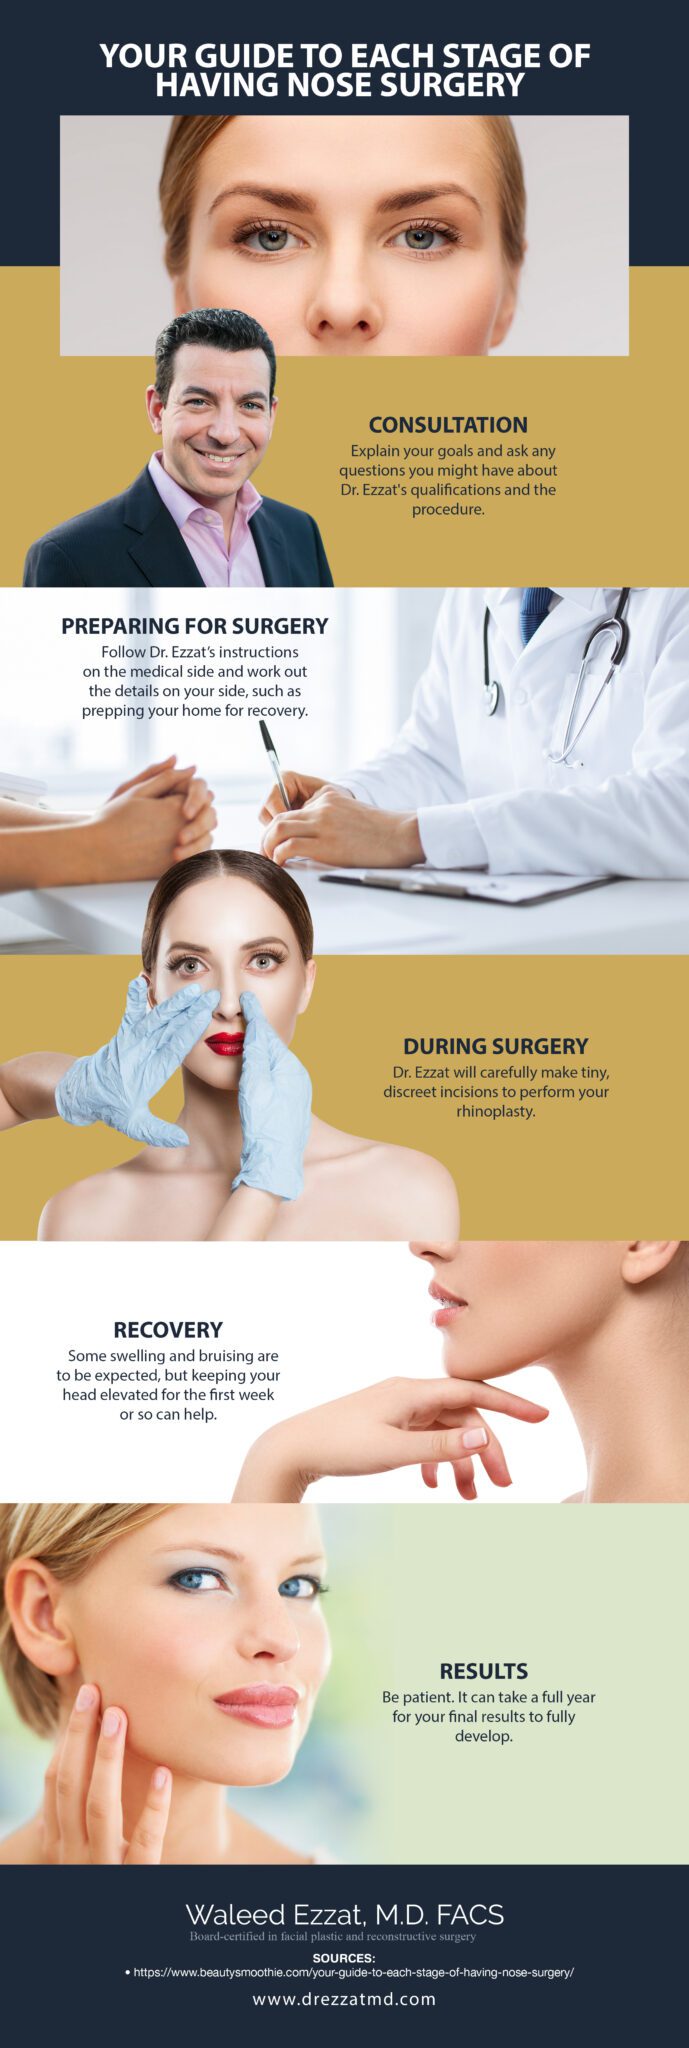 Your Guide To Each Stage of Having Nose Surgery [Infographic] img 1